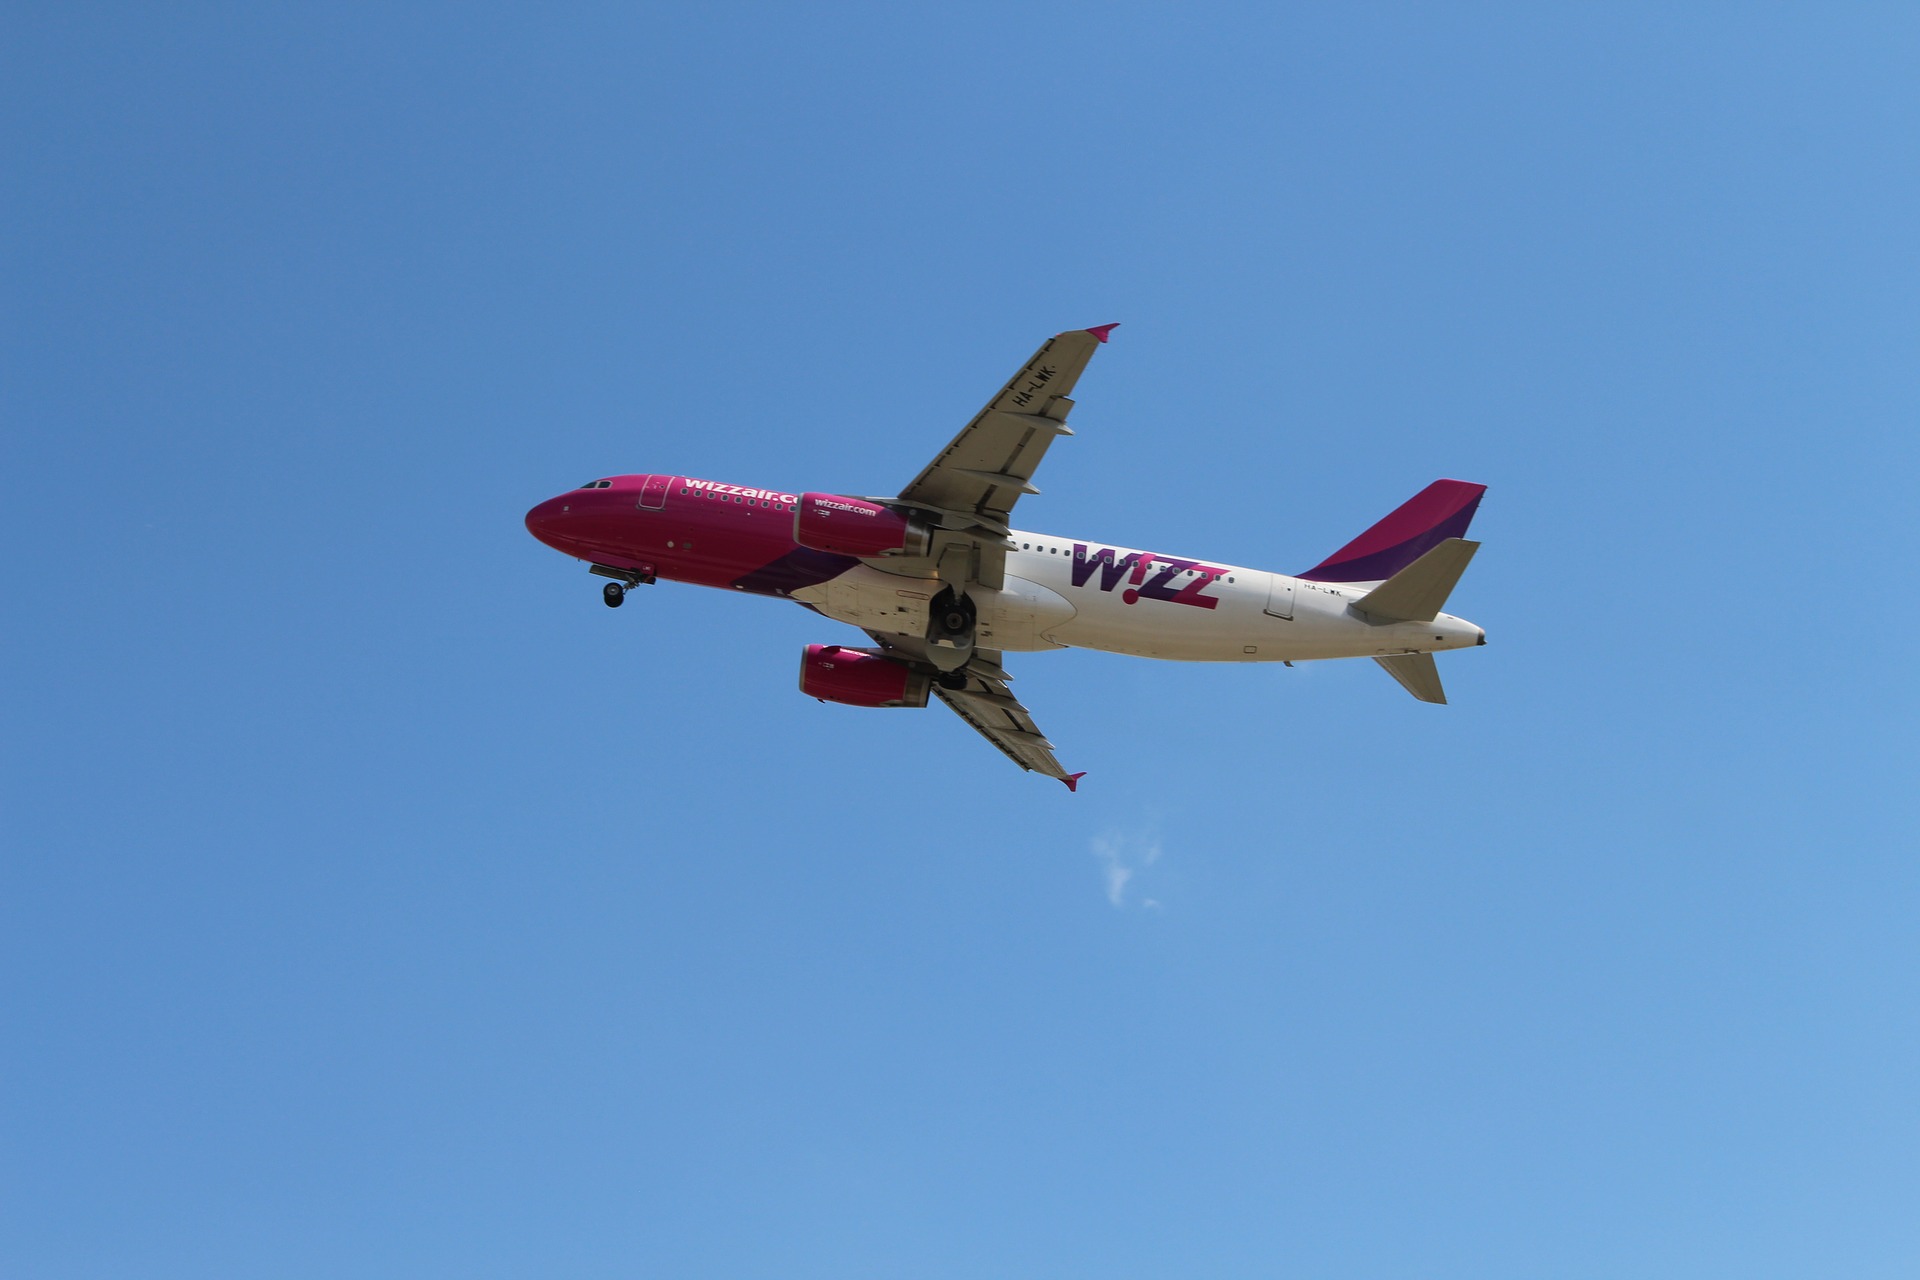 Canceled Flights and Tension - Staff Shortages at WizzAir and in the Aviation Industry